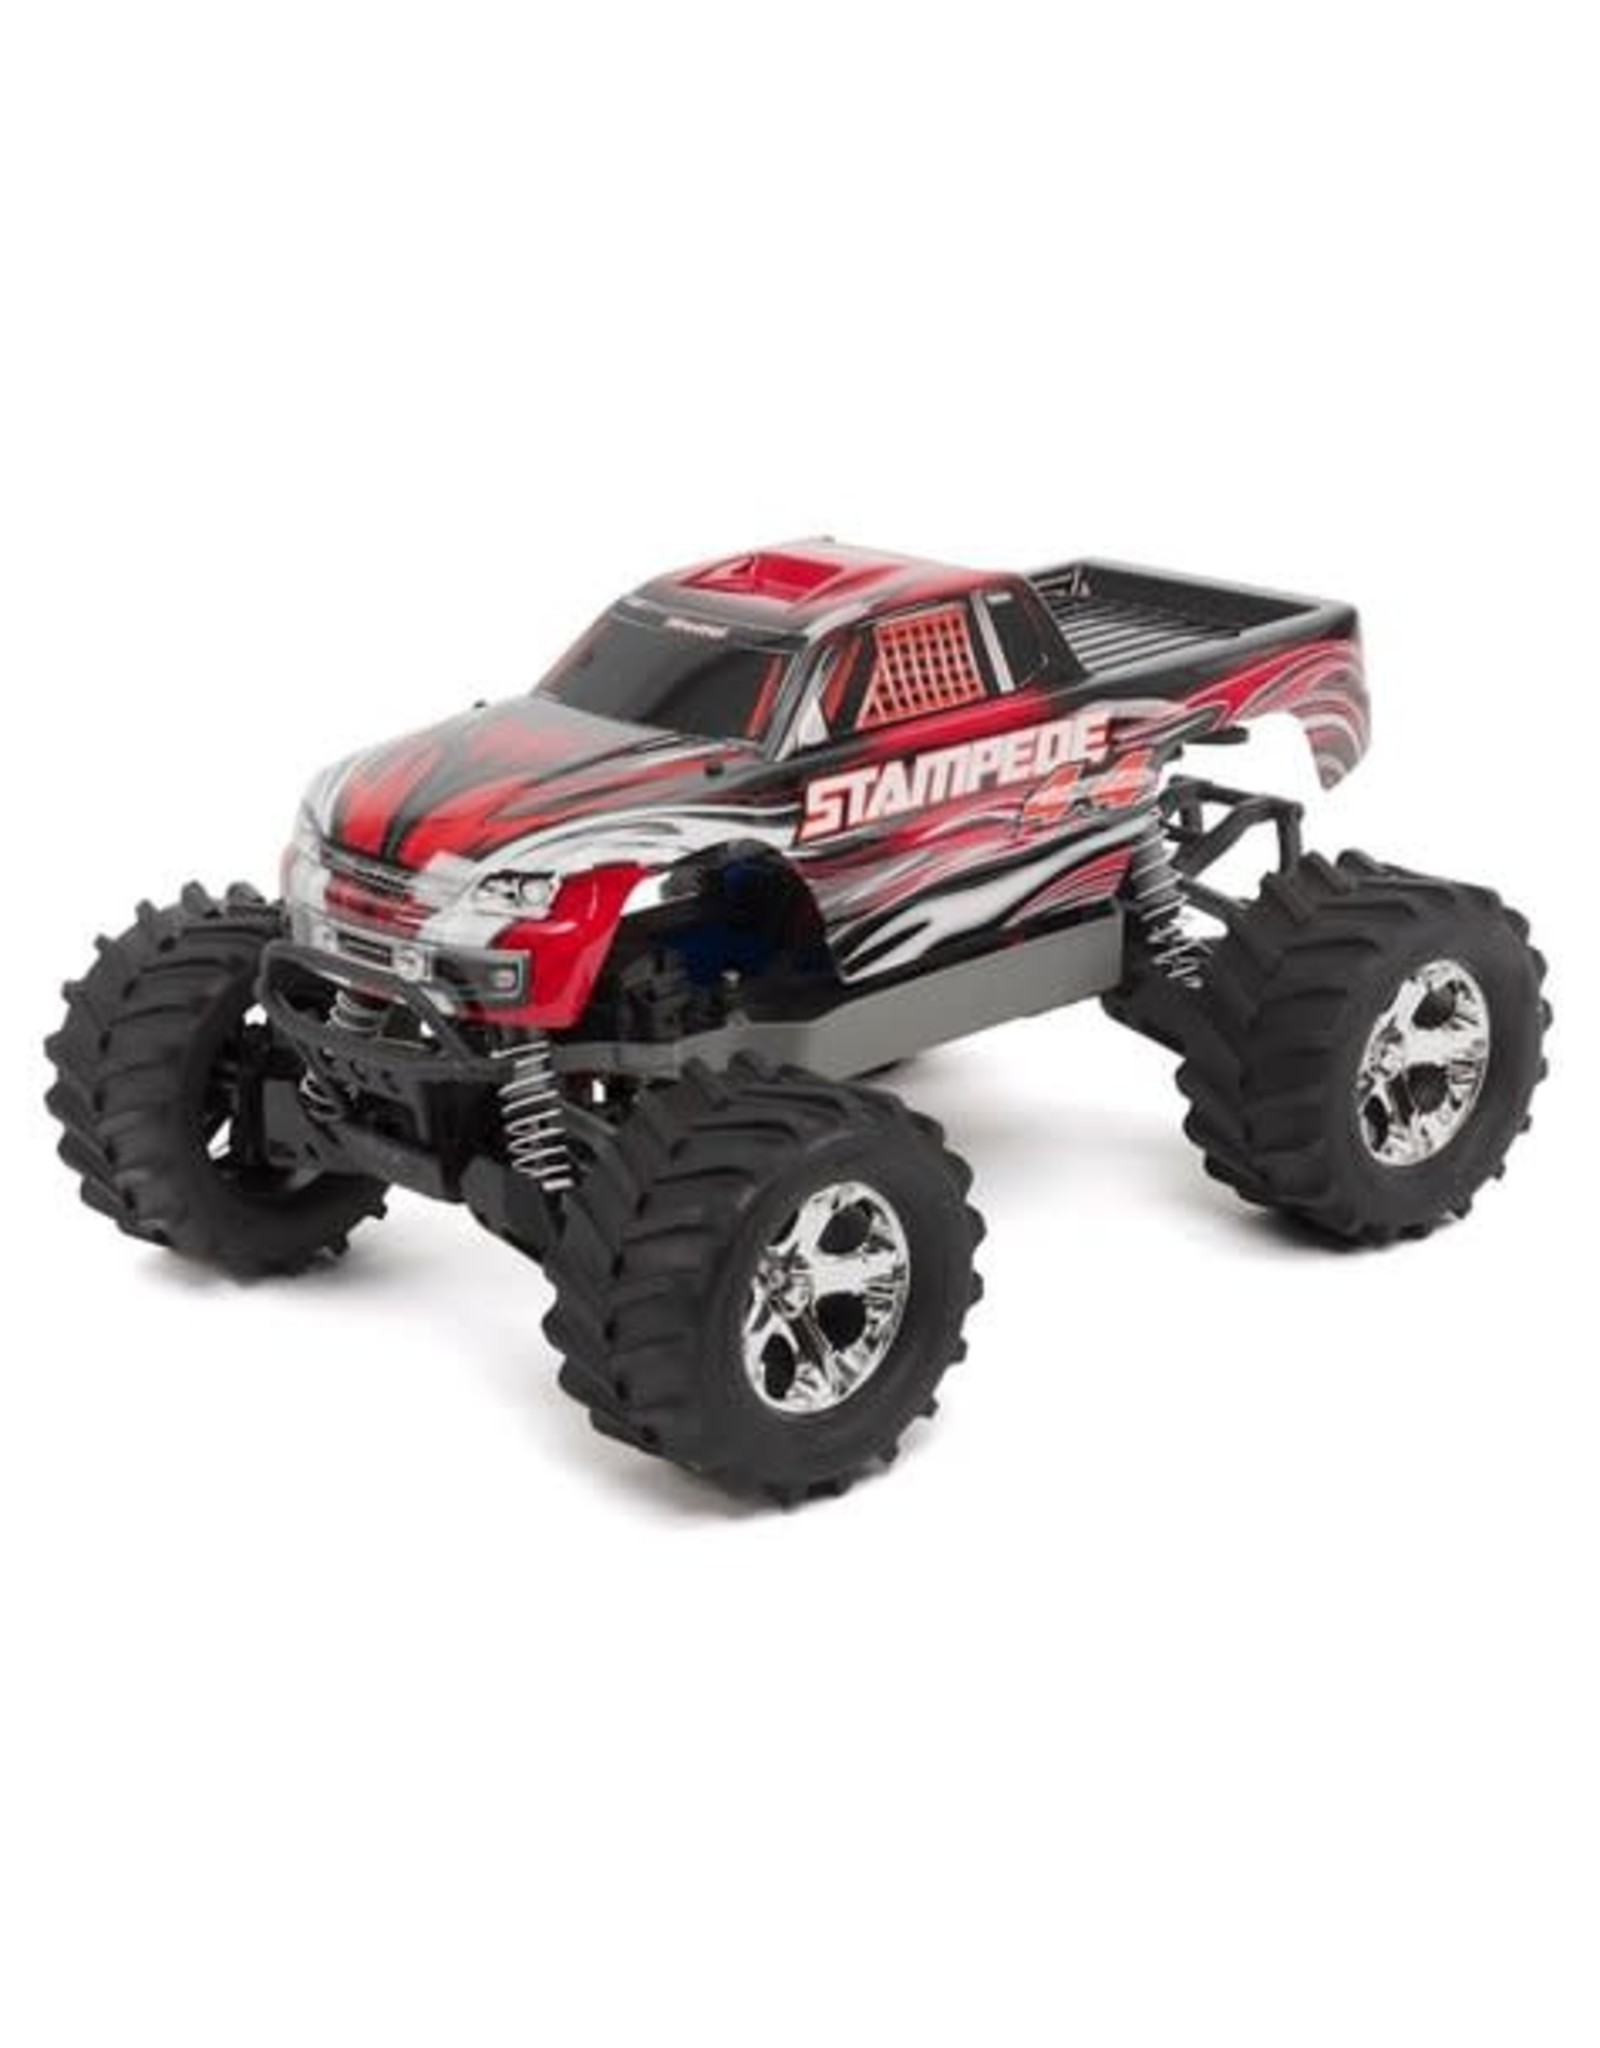 Traxxas Stampede 4x4 Brushed Red 67054-1